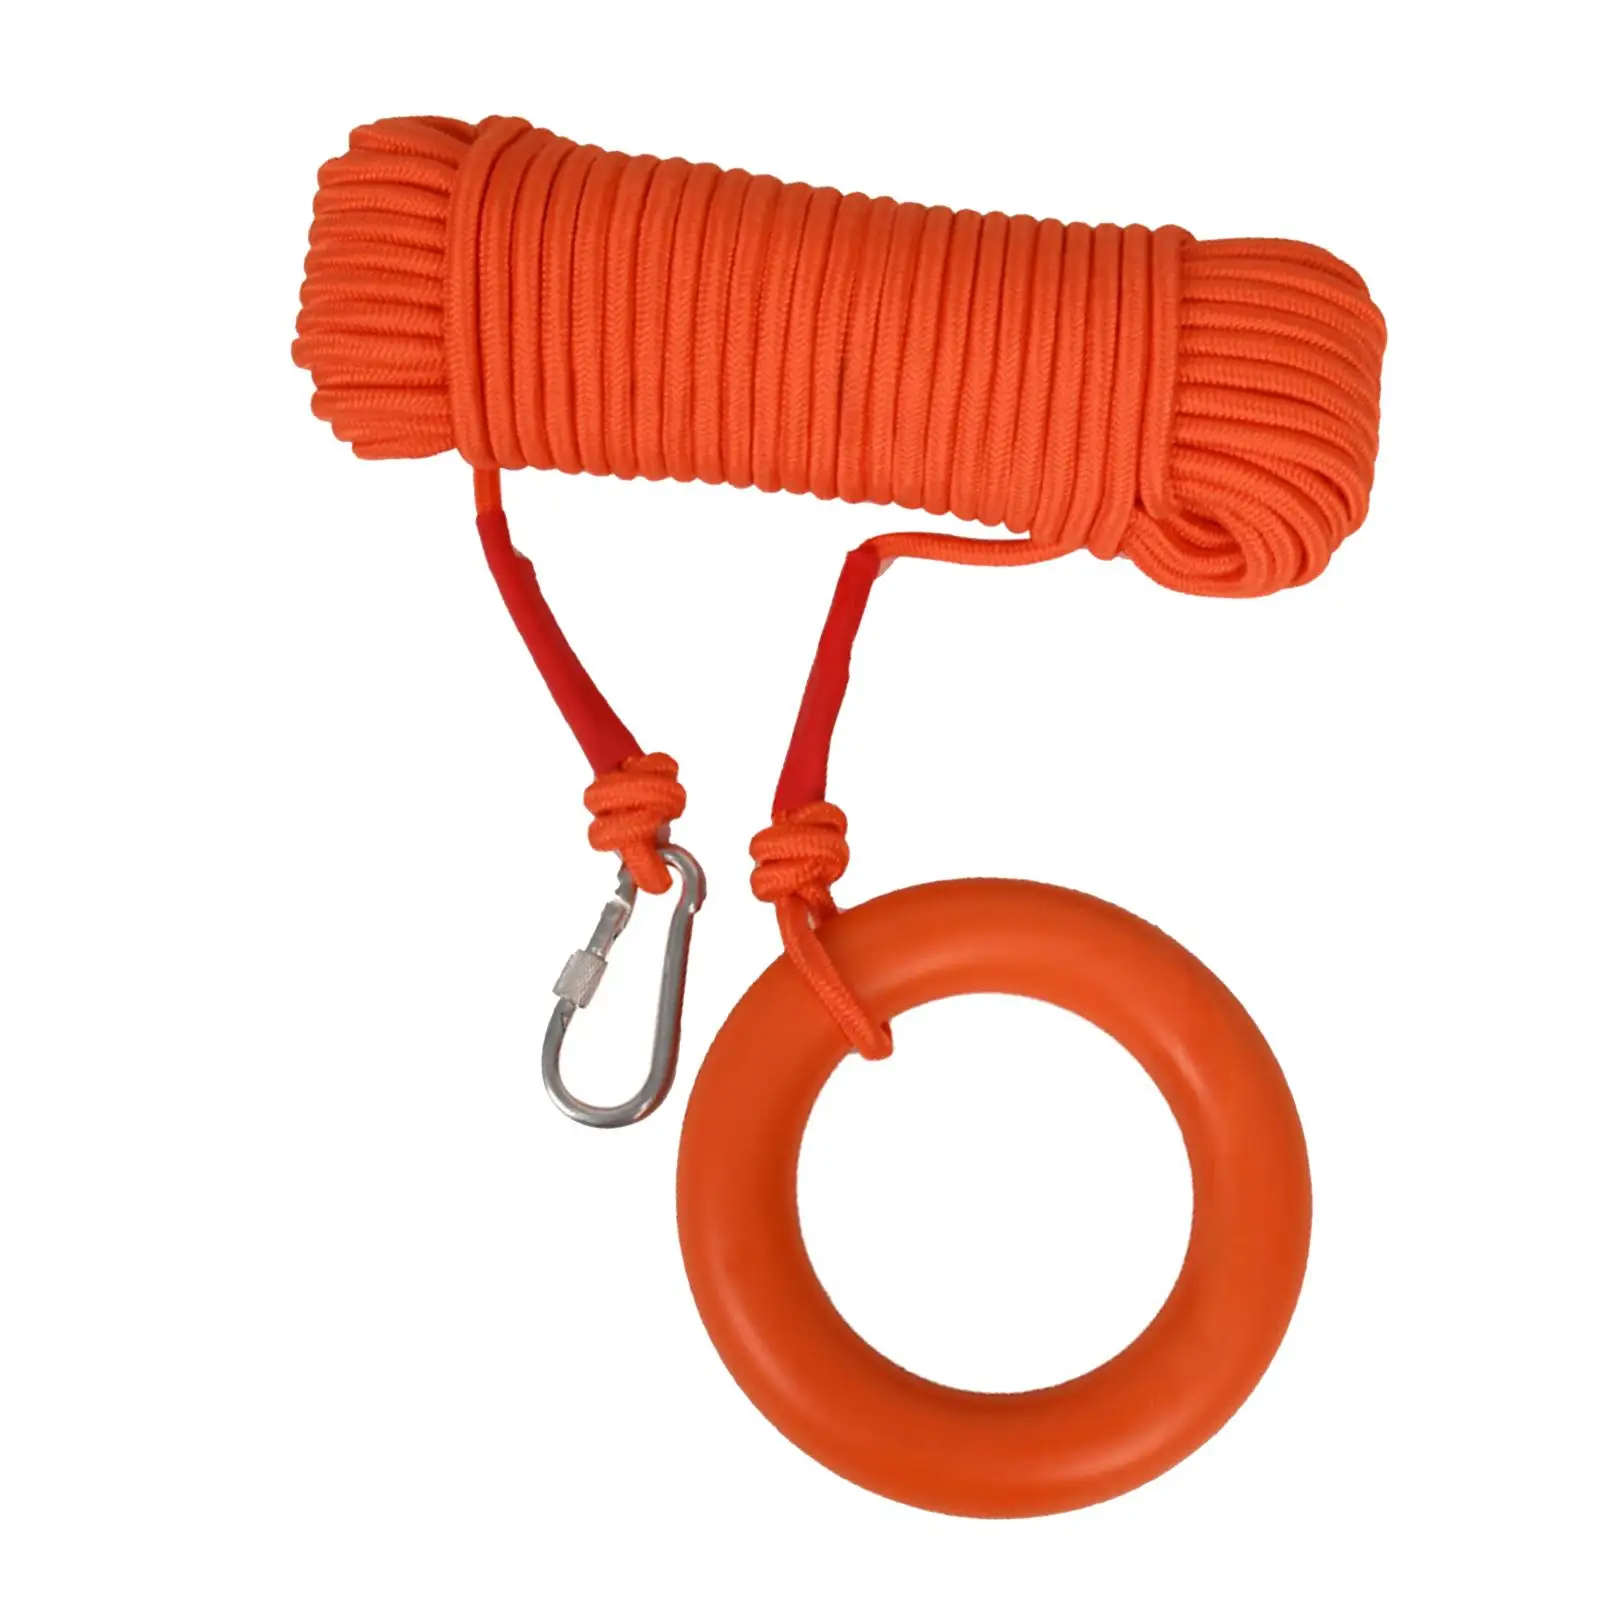 Life Saving Rope Equipment Thickness Emergency Cord Flotation Device Throwable Device for Diving Swimming Kayaking Canoe Rafting